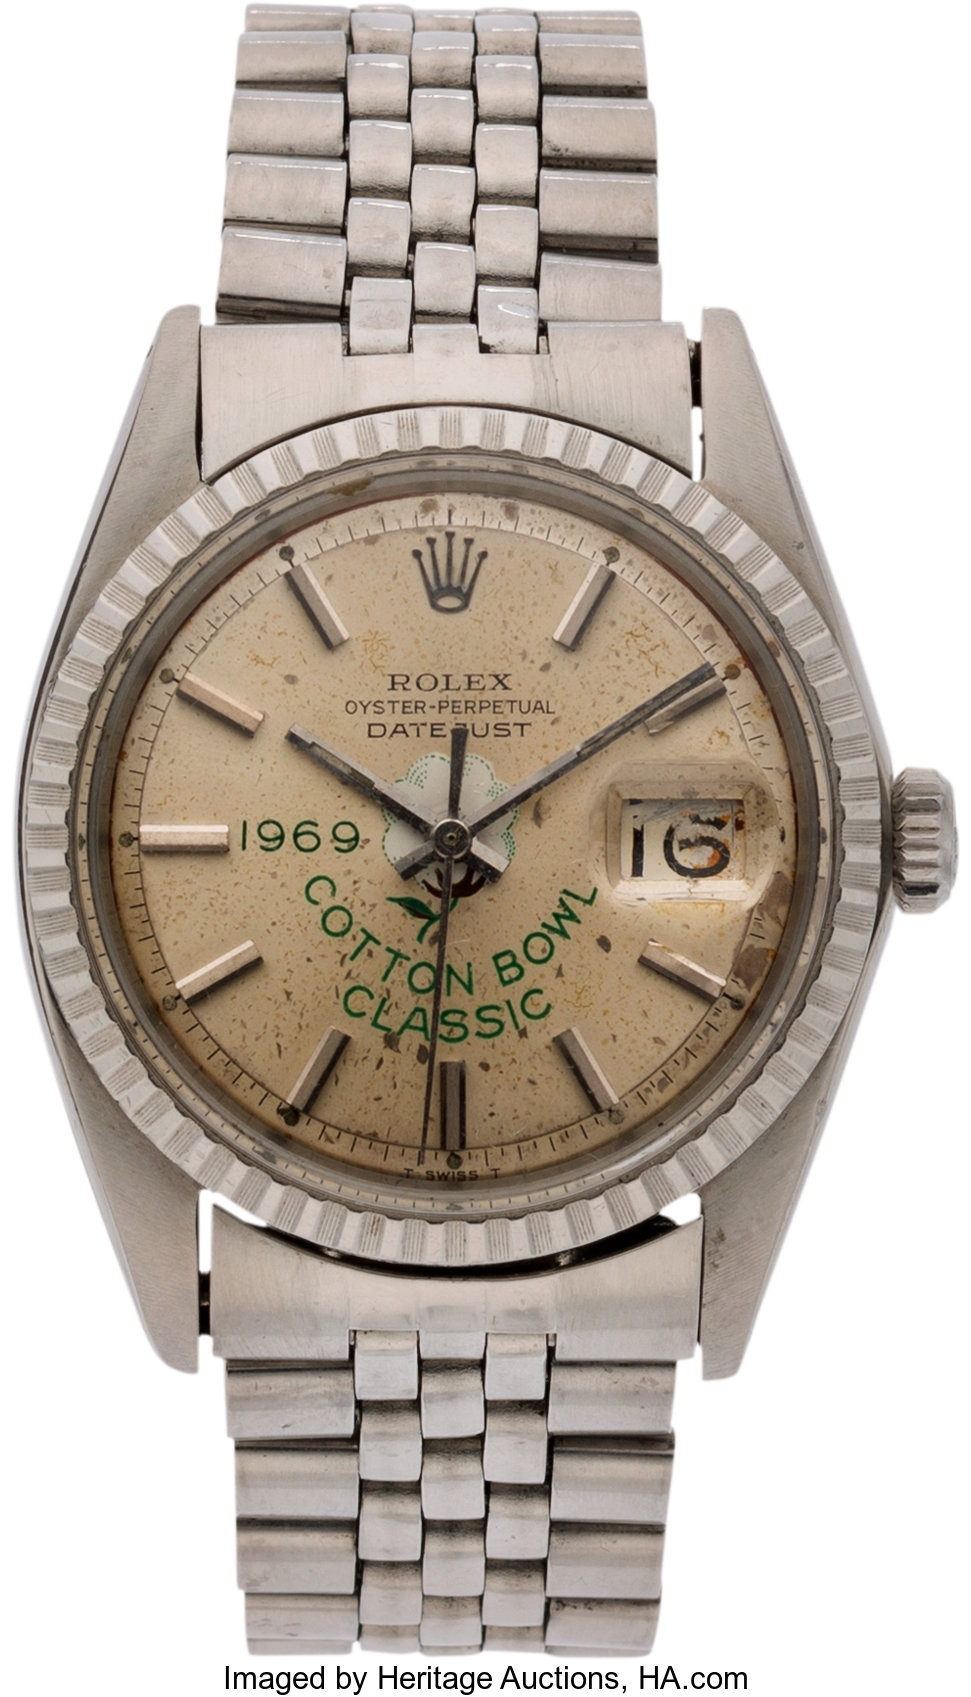 1969 Cotton Bowl Classic Championship Rolex Watch Presented to Lot